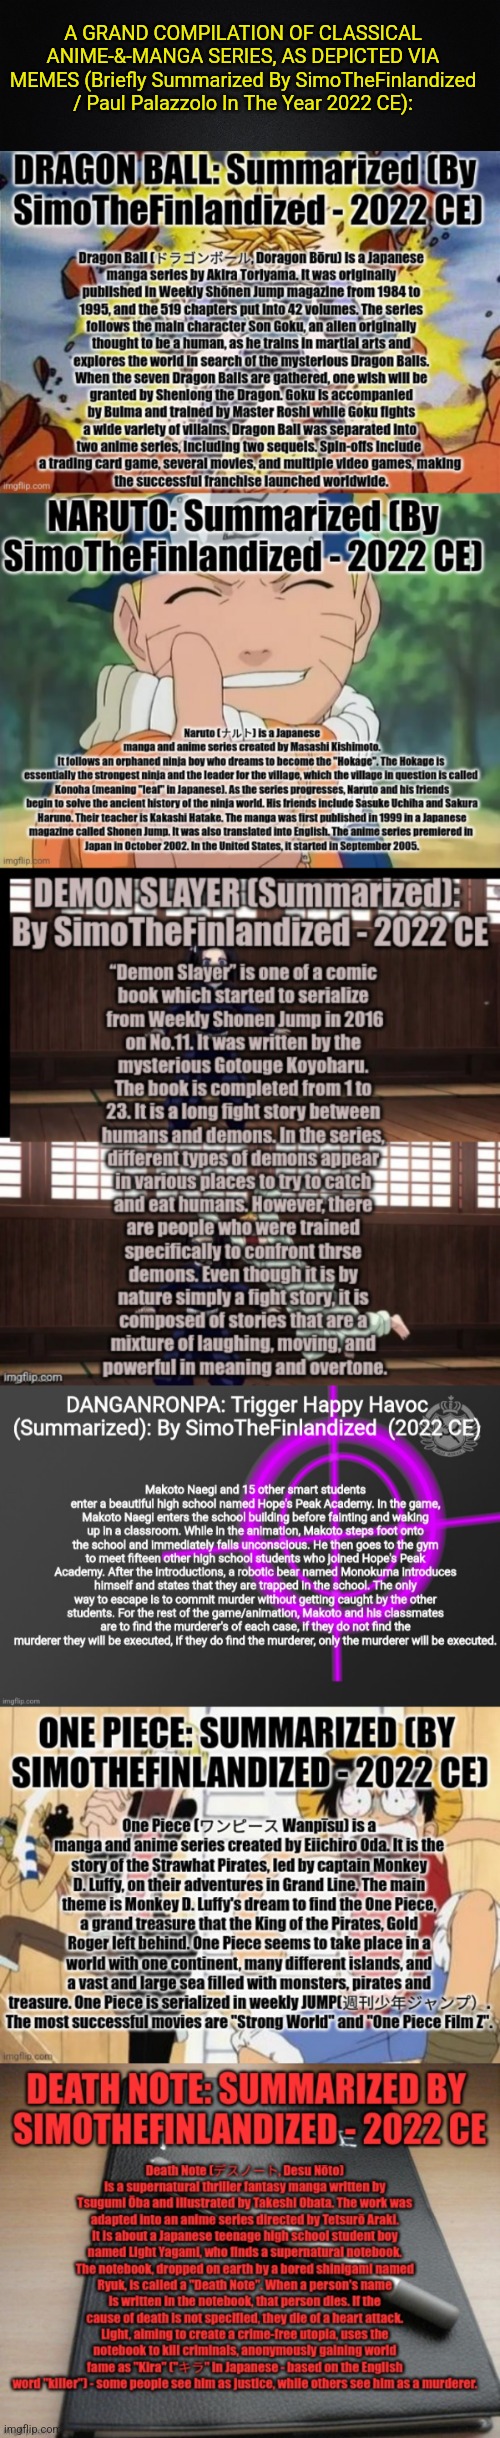 A GRAND COMPILATION OF CLASSICAL ANIME-&-MANGA SERIES, AS DEPICTED VIA MEMES (By SimoTheFinlandized - 2022 CE) | A GRAND COMPILATION OF CLASSICAL ANIME-&-MANGA SERIES, AS DEPICTED VIA MEMES (Briefly Summarized By SimoTheFinlandized / Paul Palazzolo In The Year 2022 CE): | image tagged in simothefinlandized,anime,manga,infographic,plot summary,compilation | made w/ Imgflip meme maker